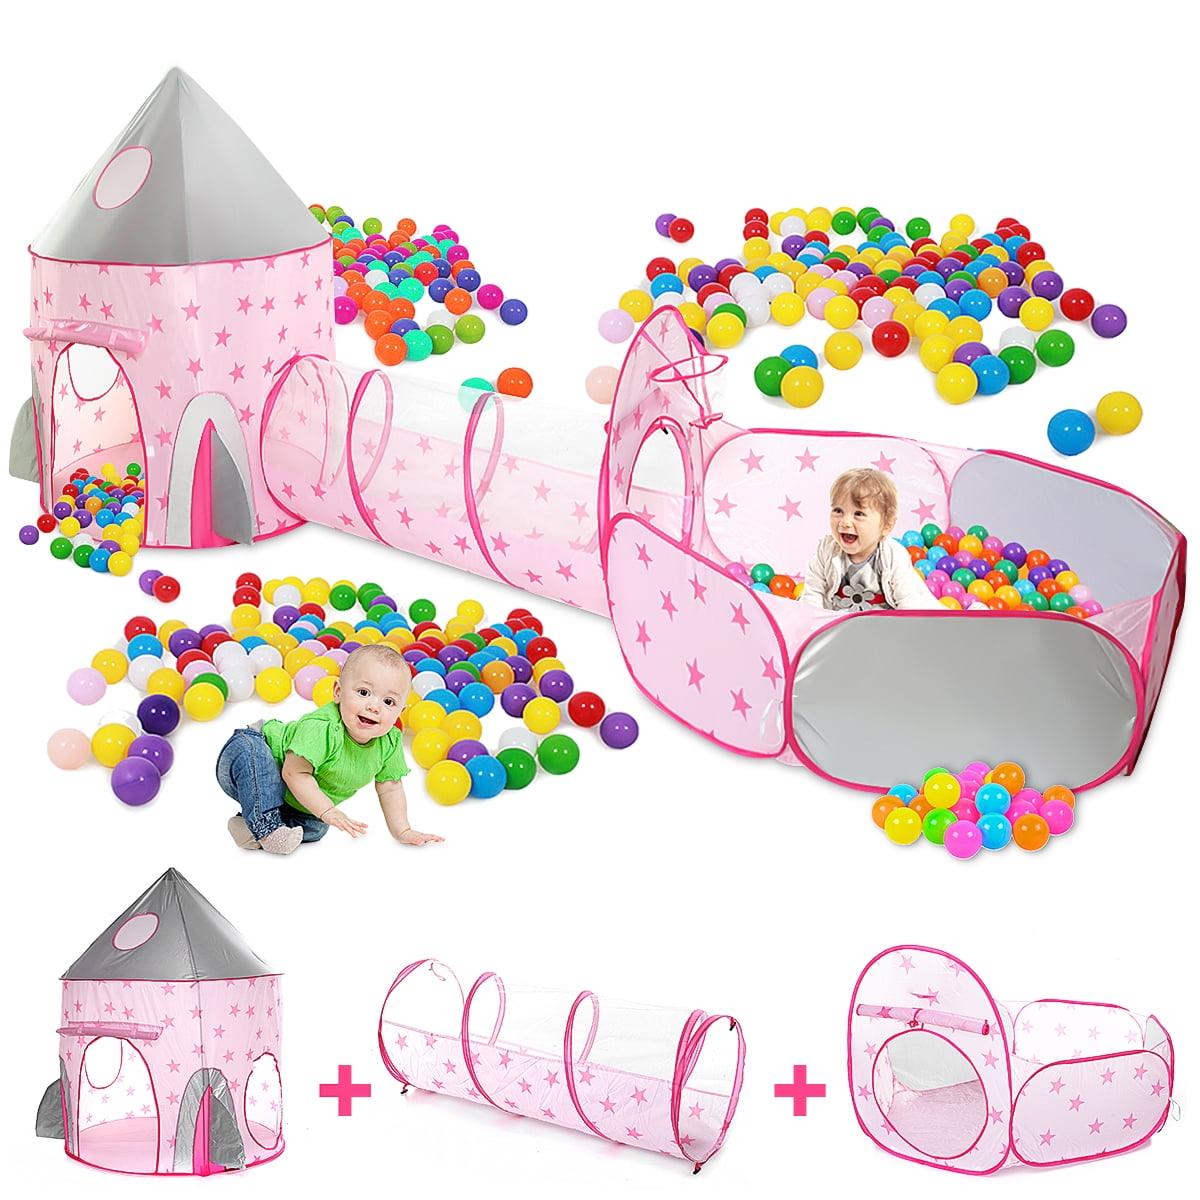 Details about   Kids Play Tent House Girls Boys Children Indoor Princess Prince Playhouse Teepee 